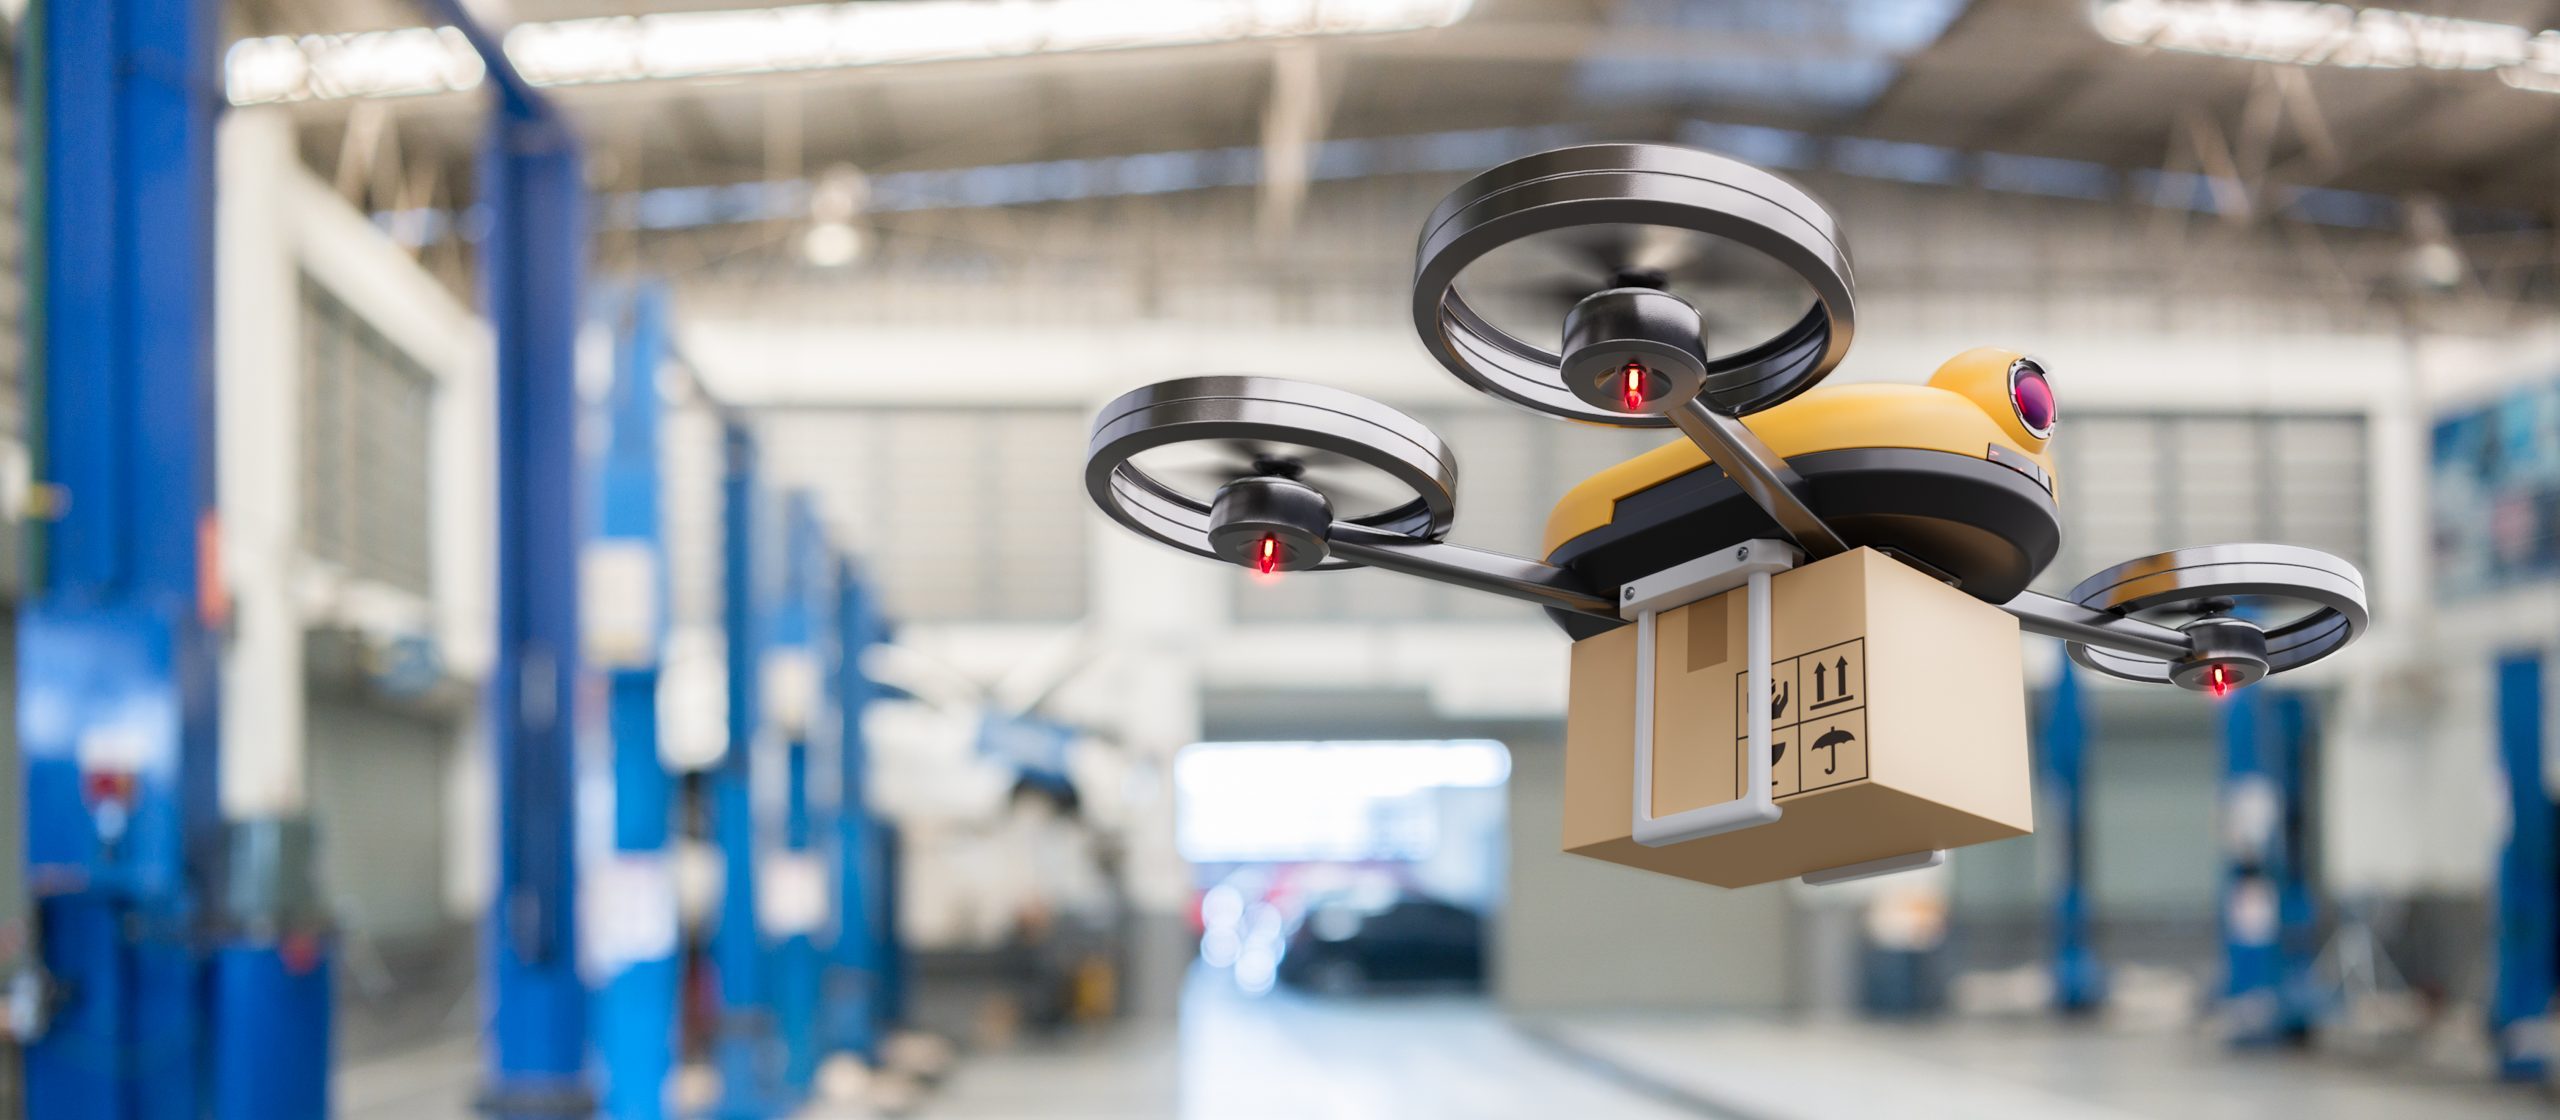 Drones take to the sky, potentially disrupting last-mile delivery